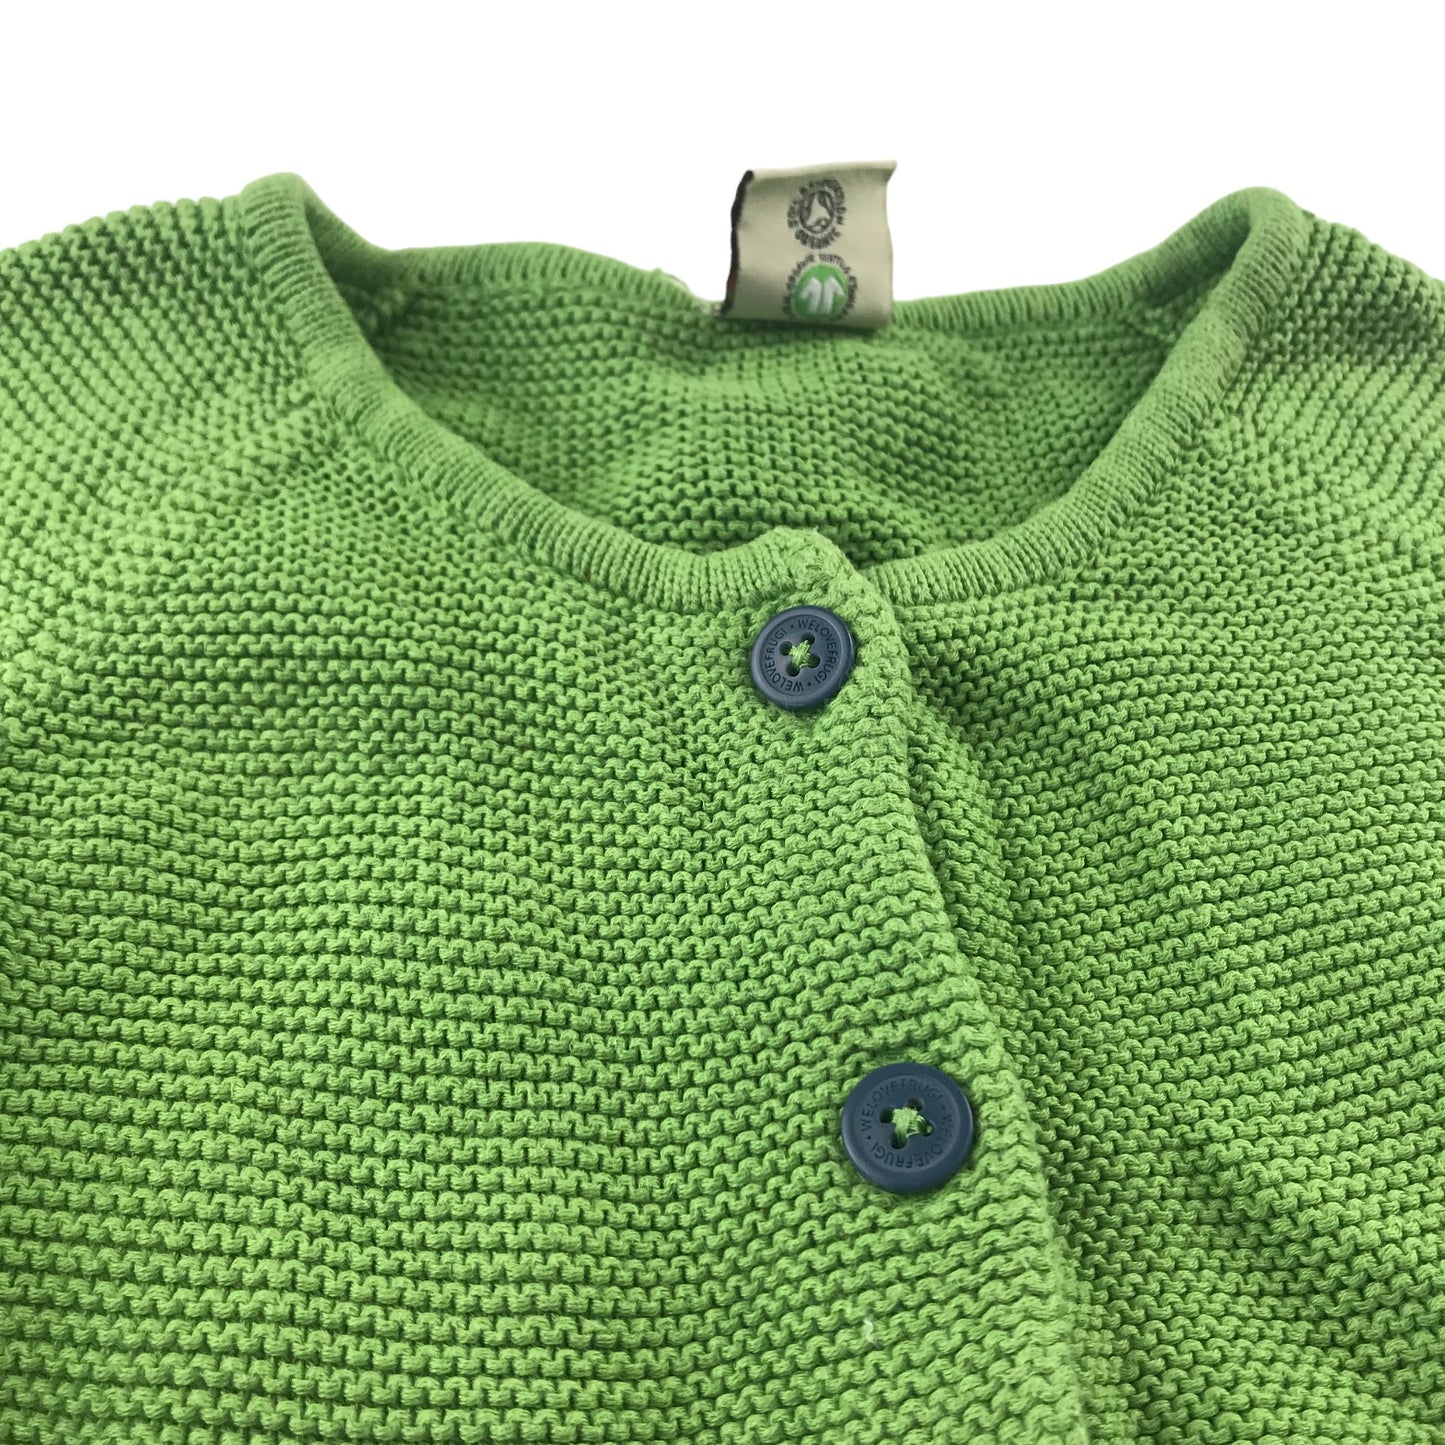 Frugi cardigan 6-7 years green embroidered bird and flowers organic cotton